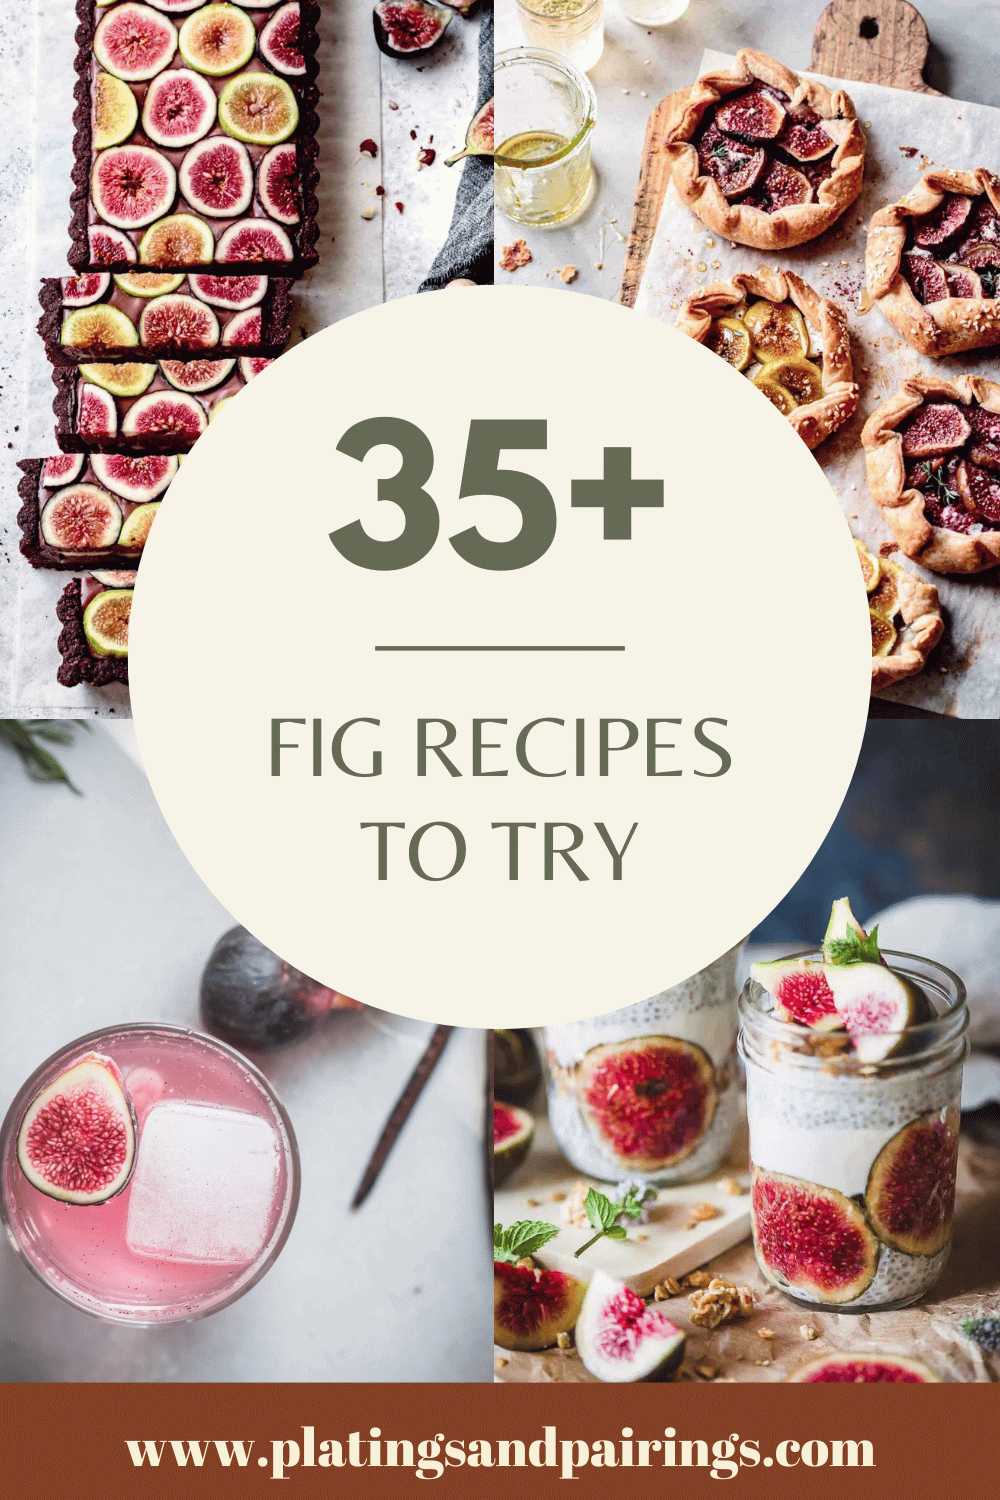 Collage of fig recipes with text overlay.